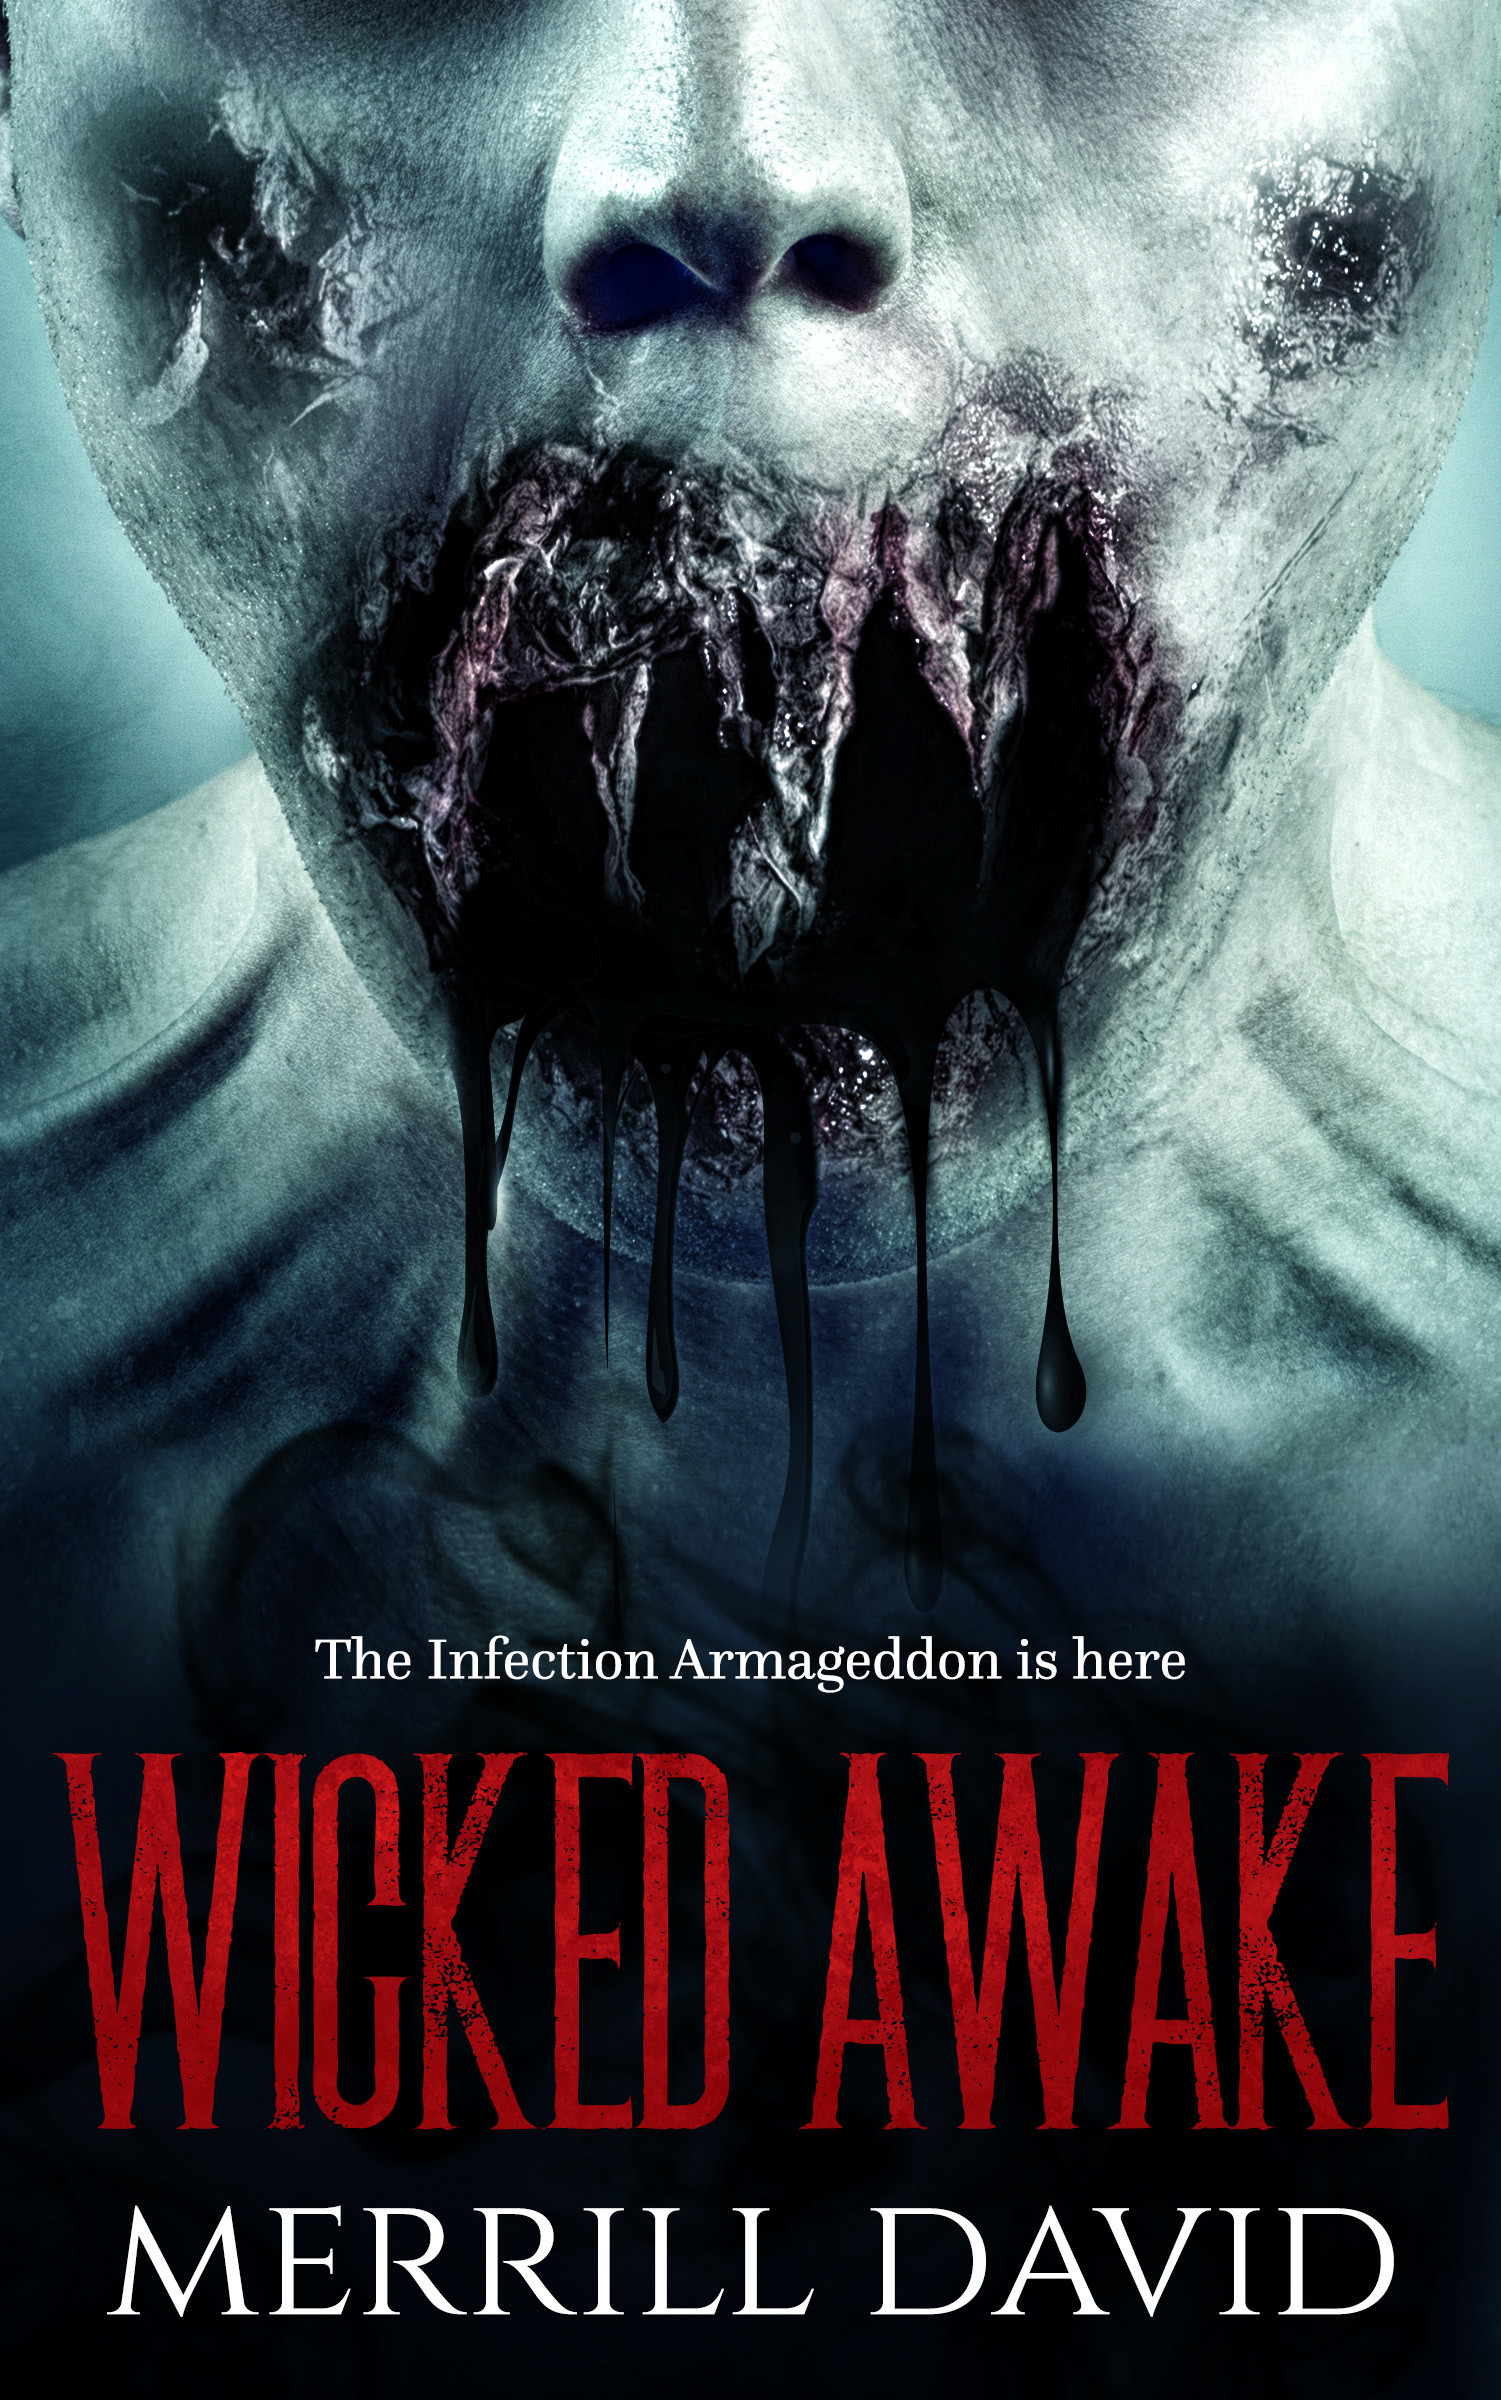 Wicked Awake book Cover by Merril David